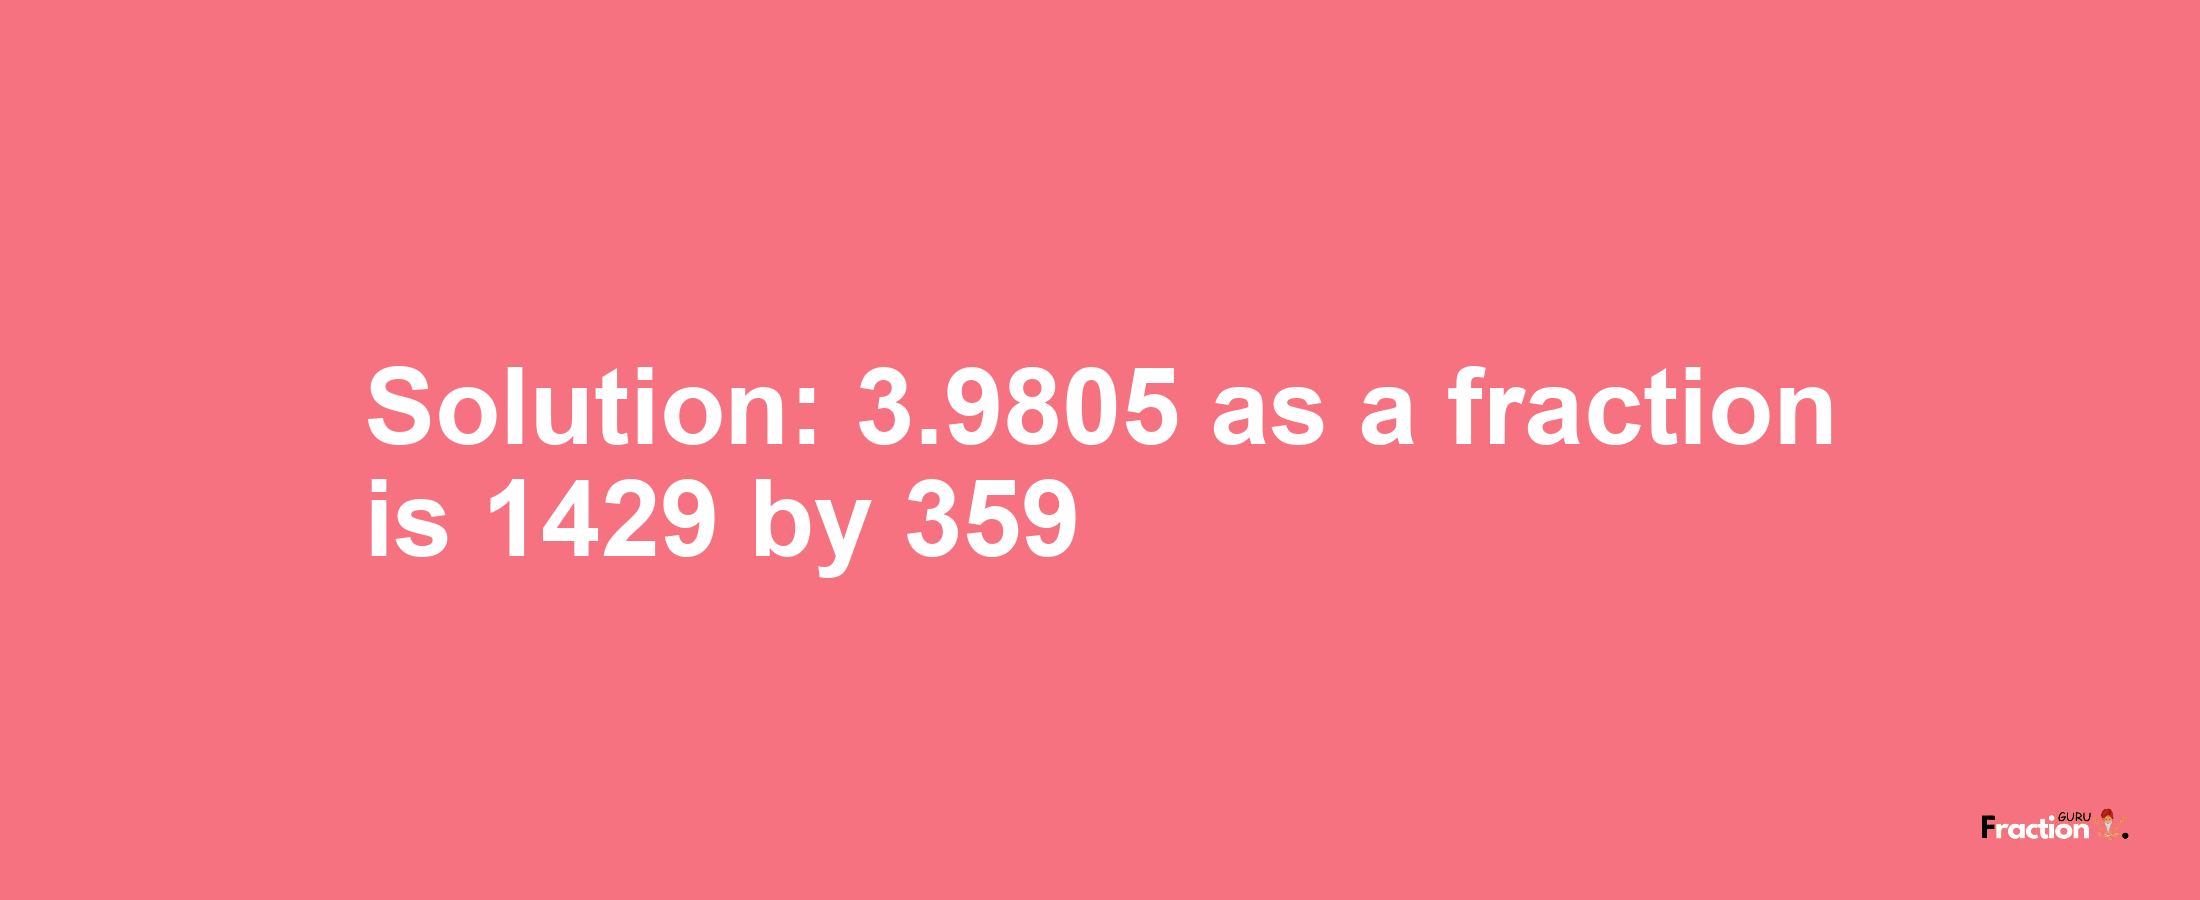 Solution:3.9805 as a fraction is 1429/359